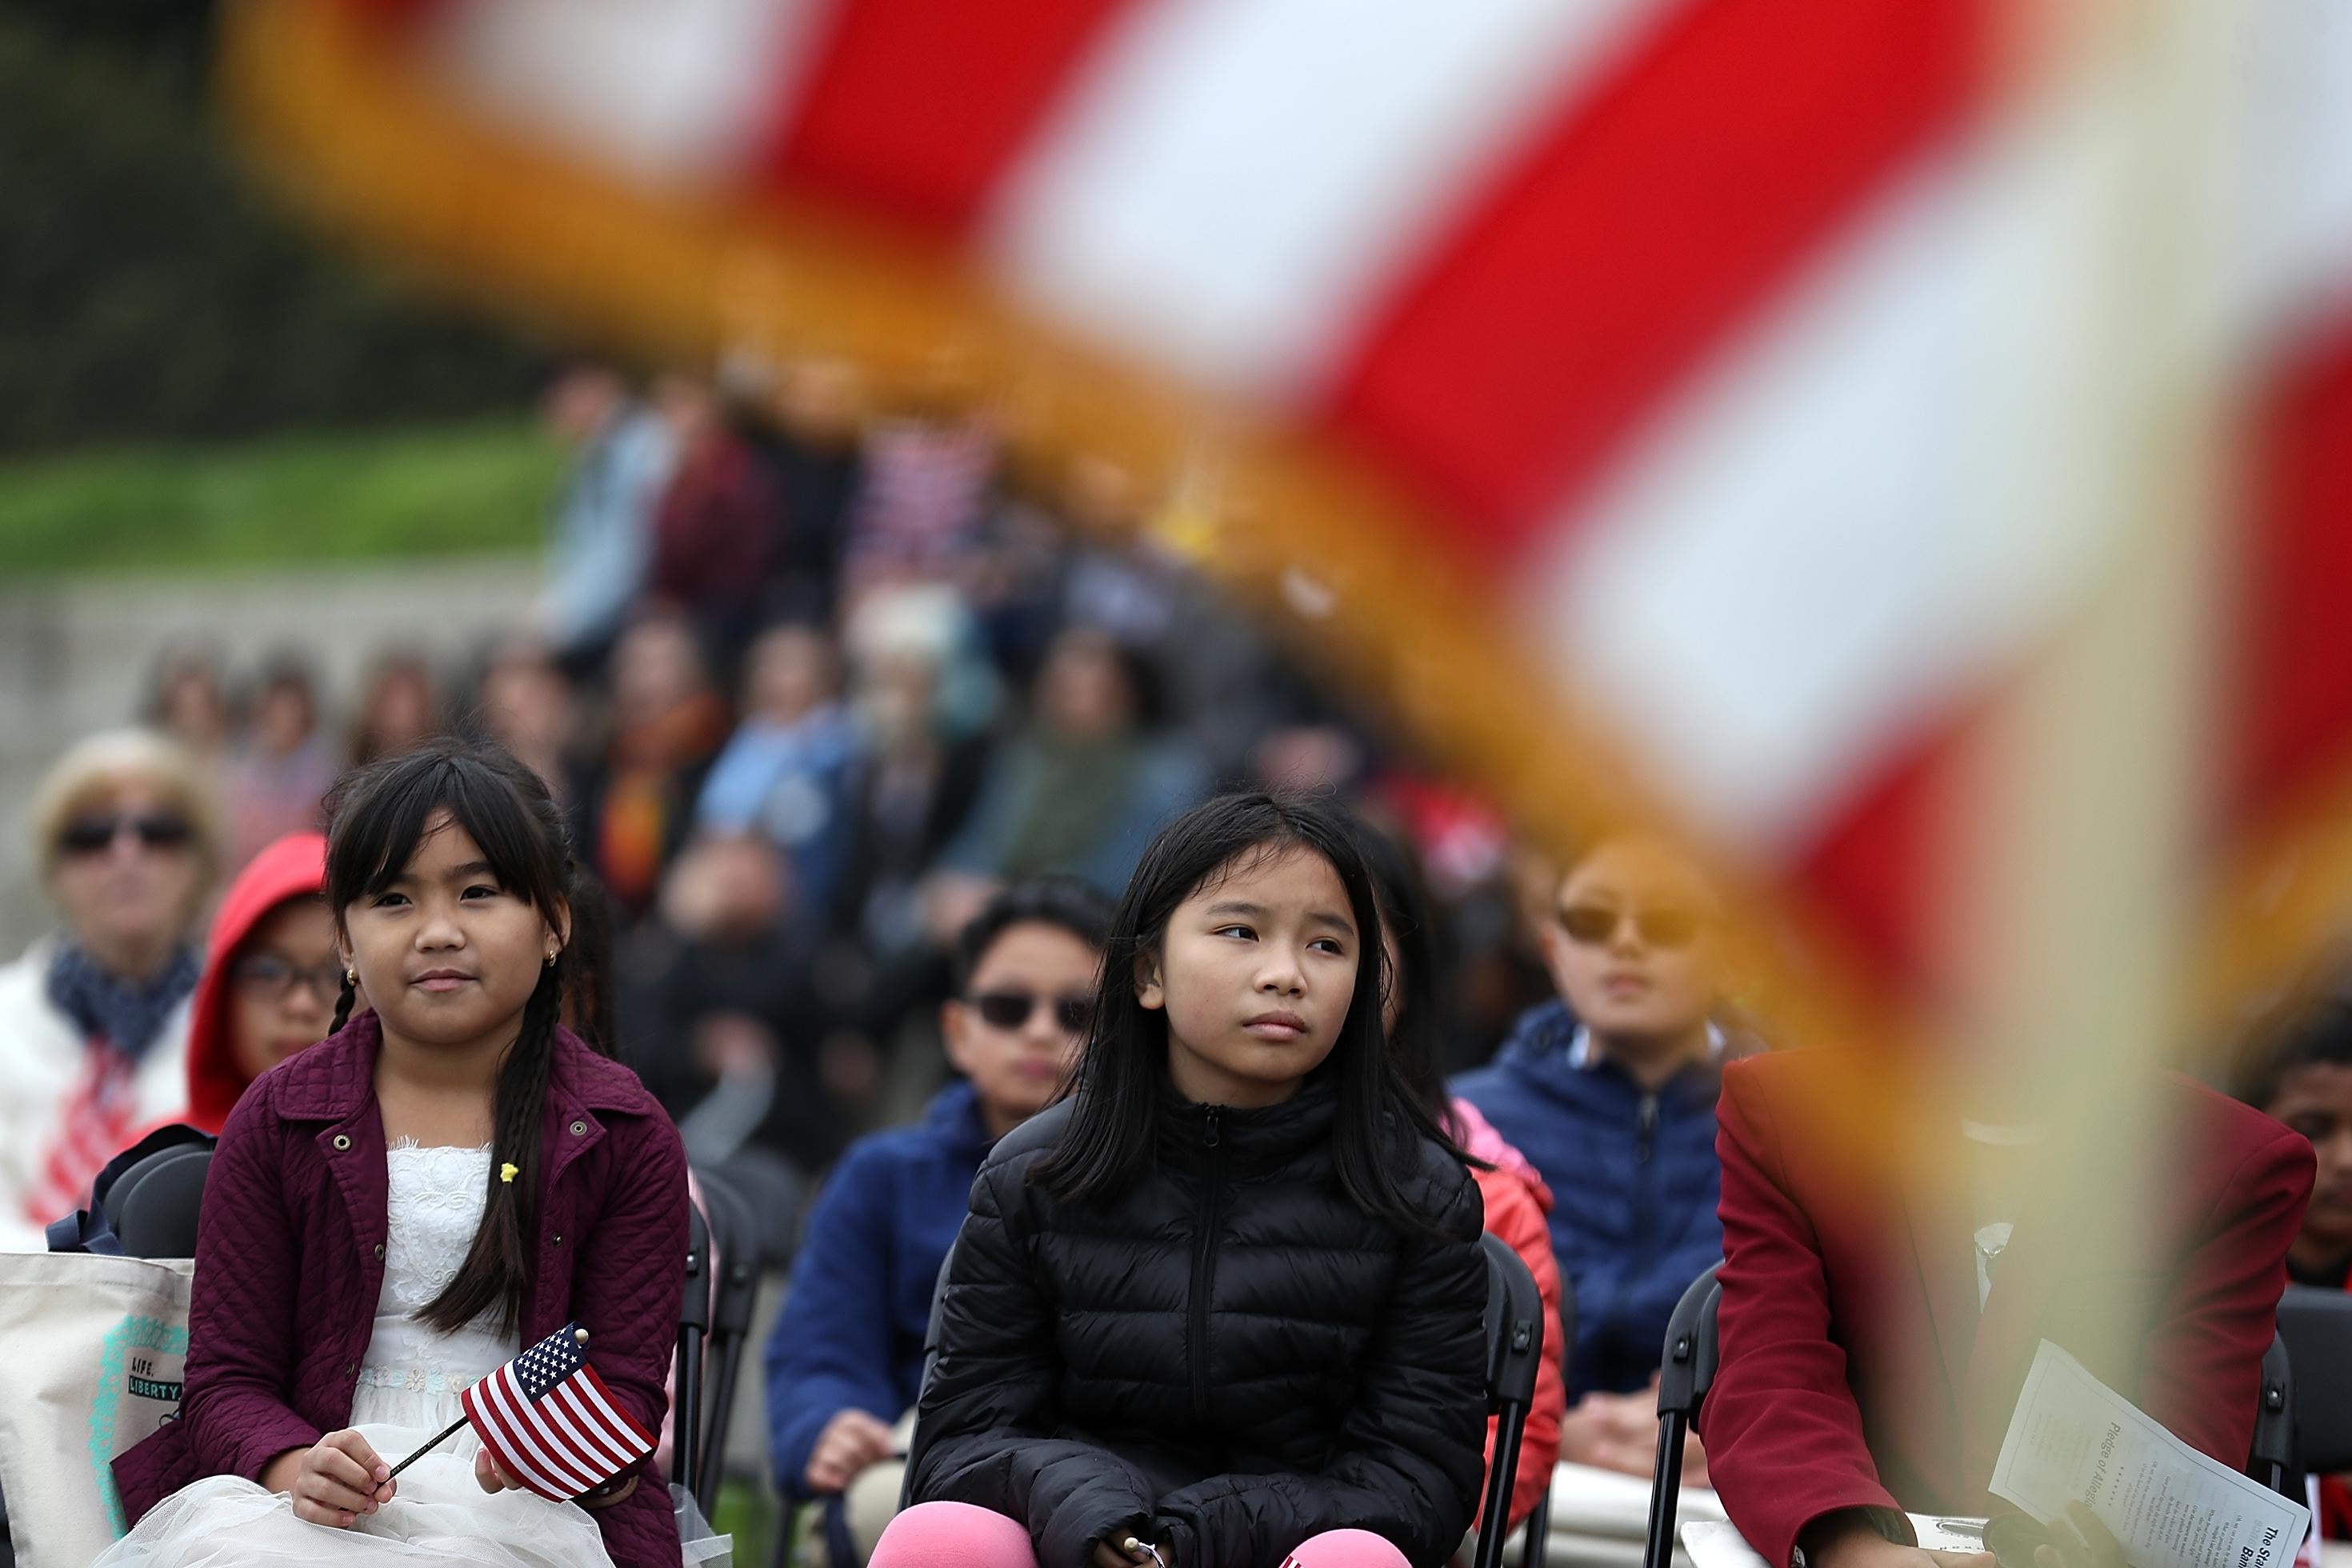 Children look on during a naturalization ceremony for kids between the ages of 6-12 at Crissy Field near the Golden Gate Bridge on August 17, 2018 in San Francisco, California.